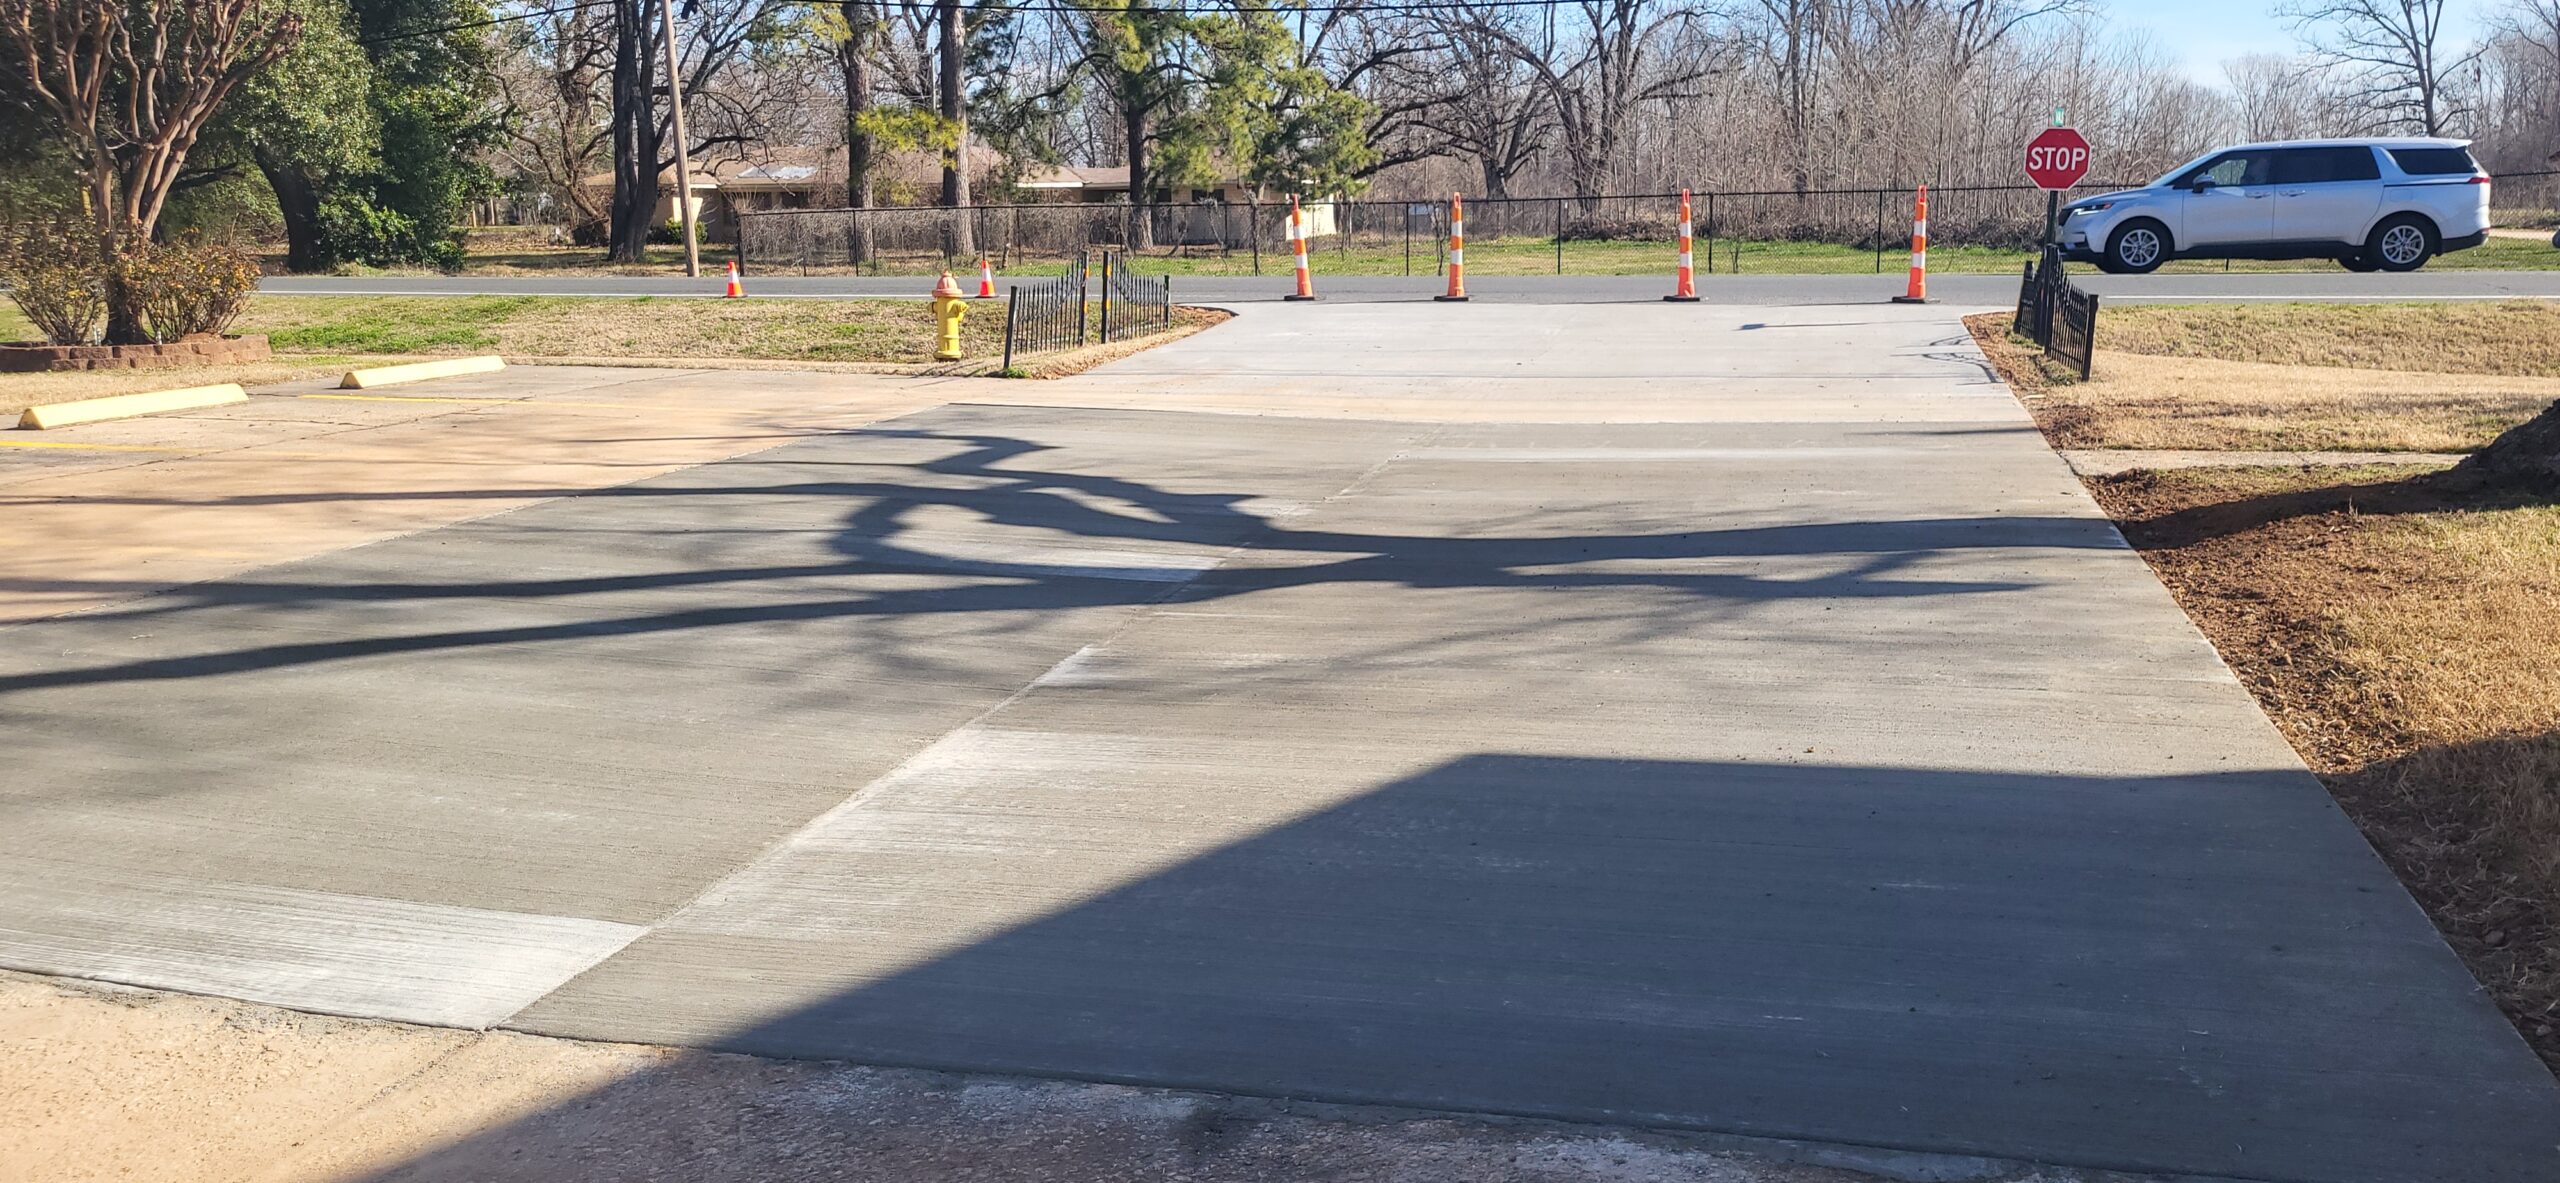 Caddo Concrete has been doing Roadway Repair for Apartment Complexes and Townhome Associations for over 25 years.